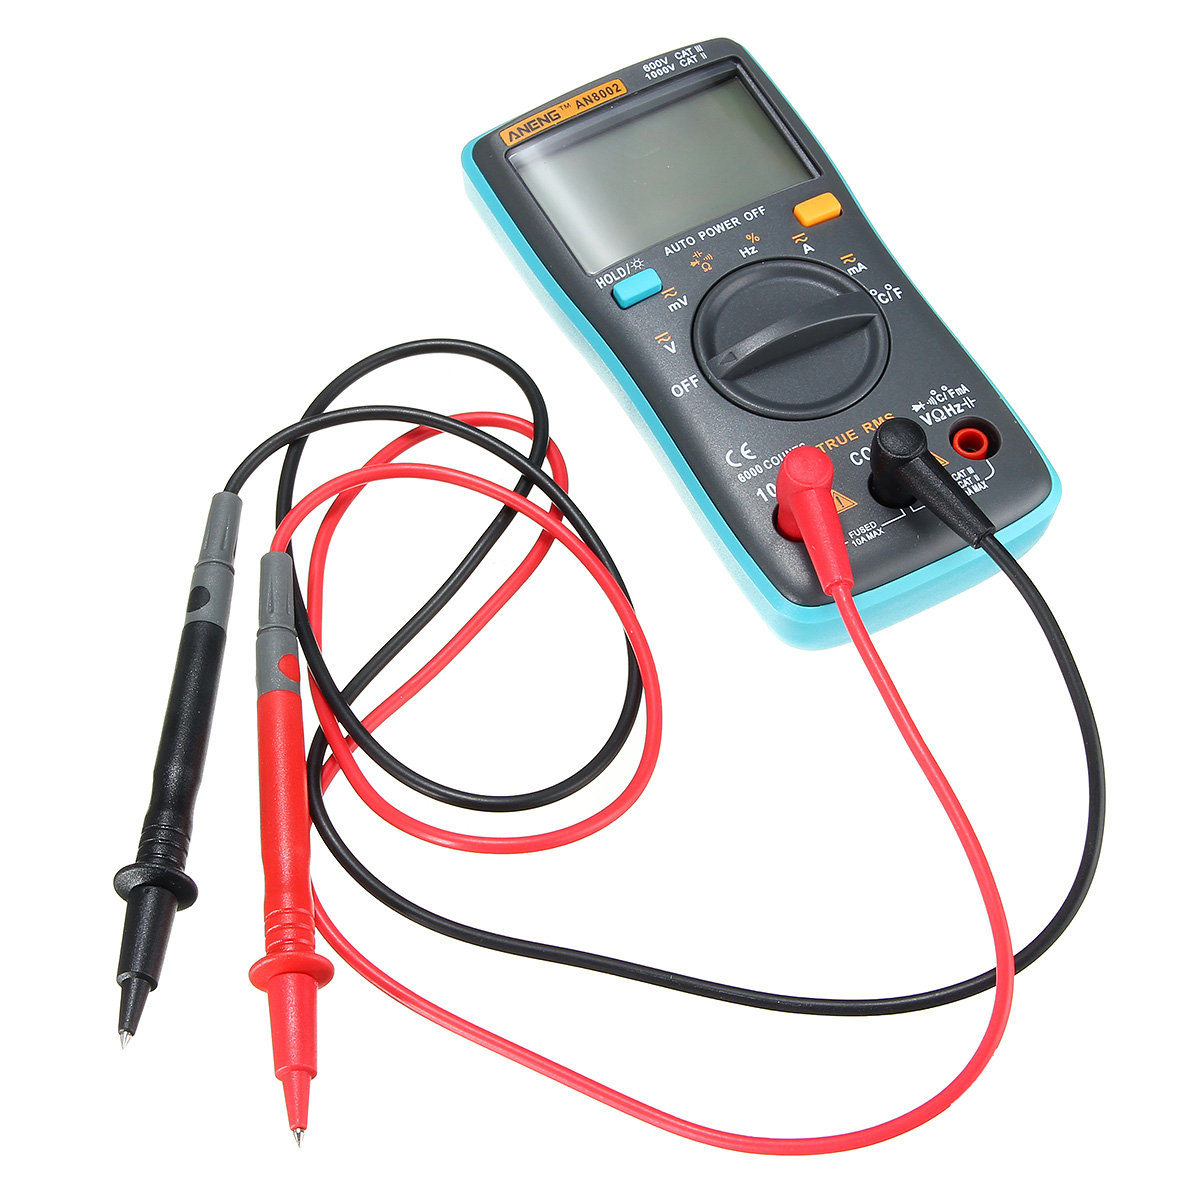 ANENG AN8002 Digital True RMS 6000 Counts Multimeter AC/DC Current Voltage Frequency Resistance Temperature Tester ℃/℉ 62